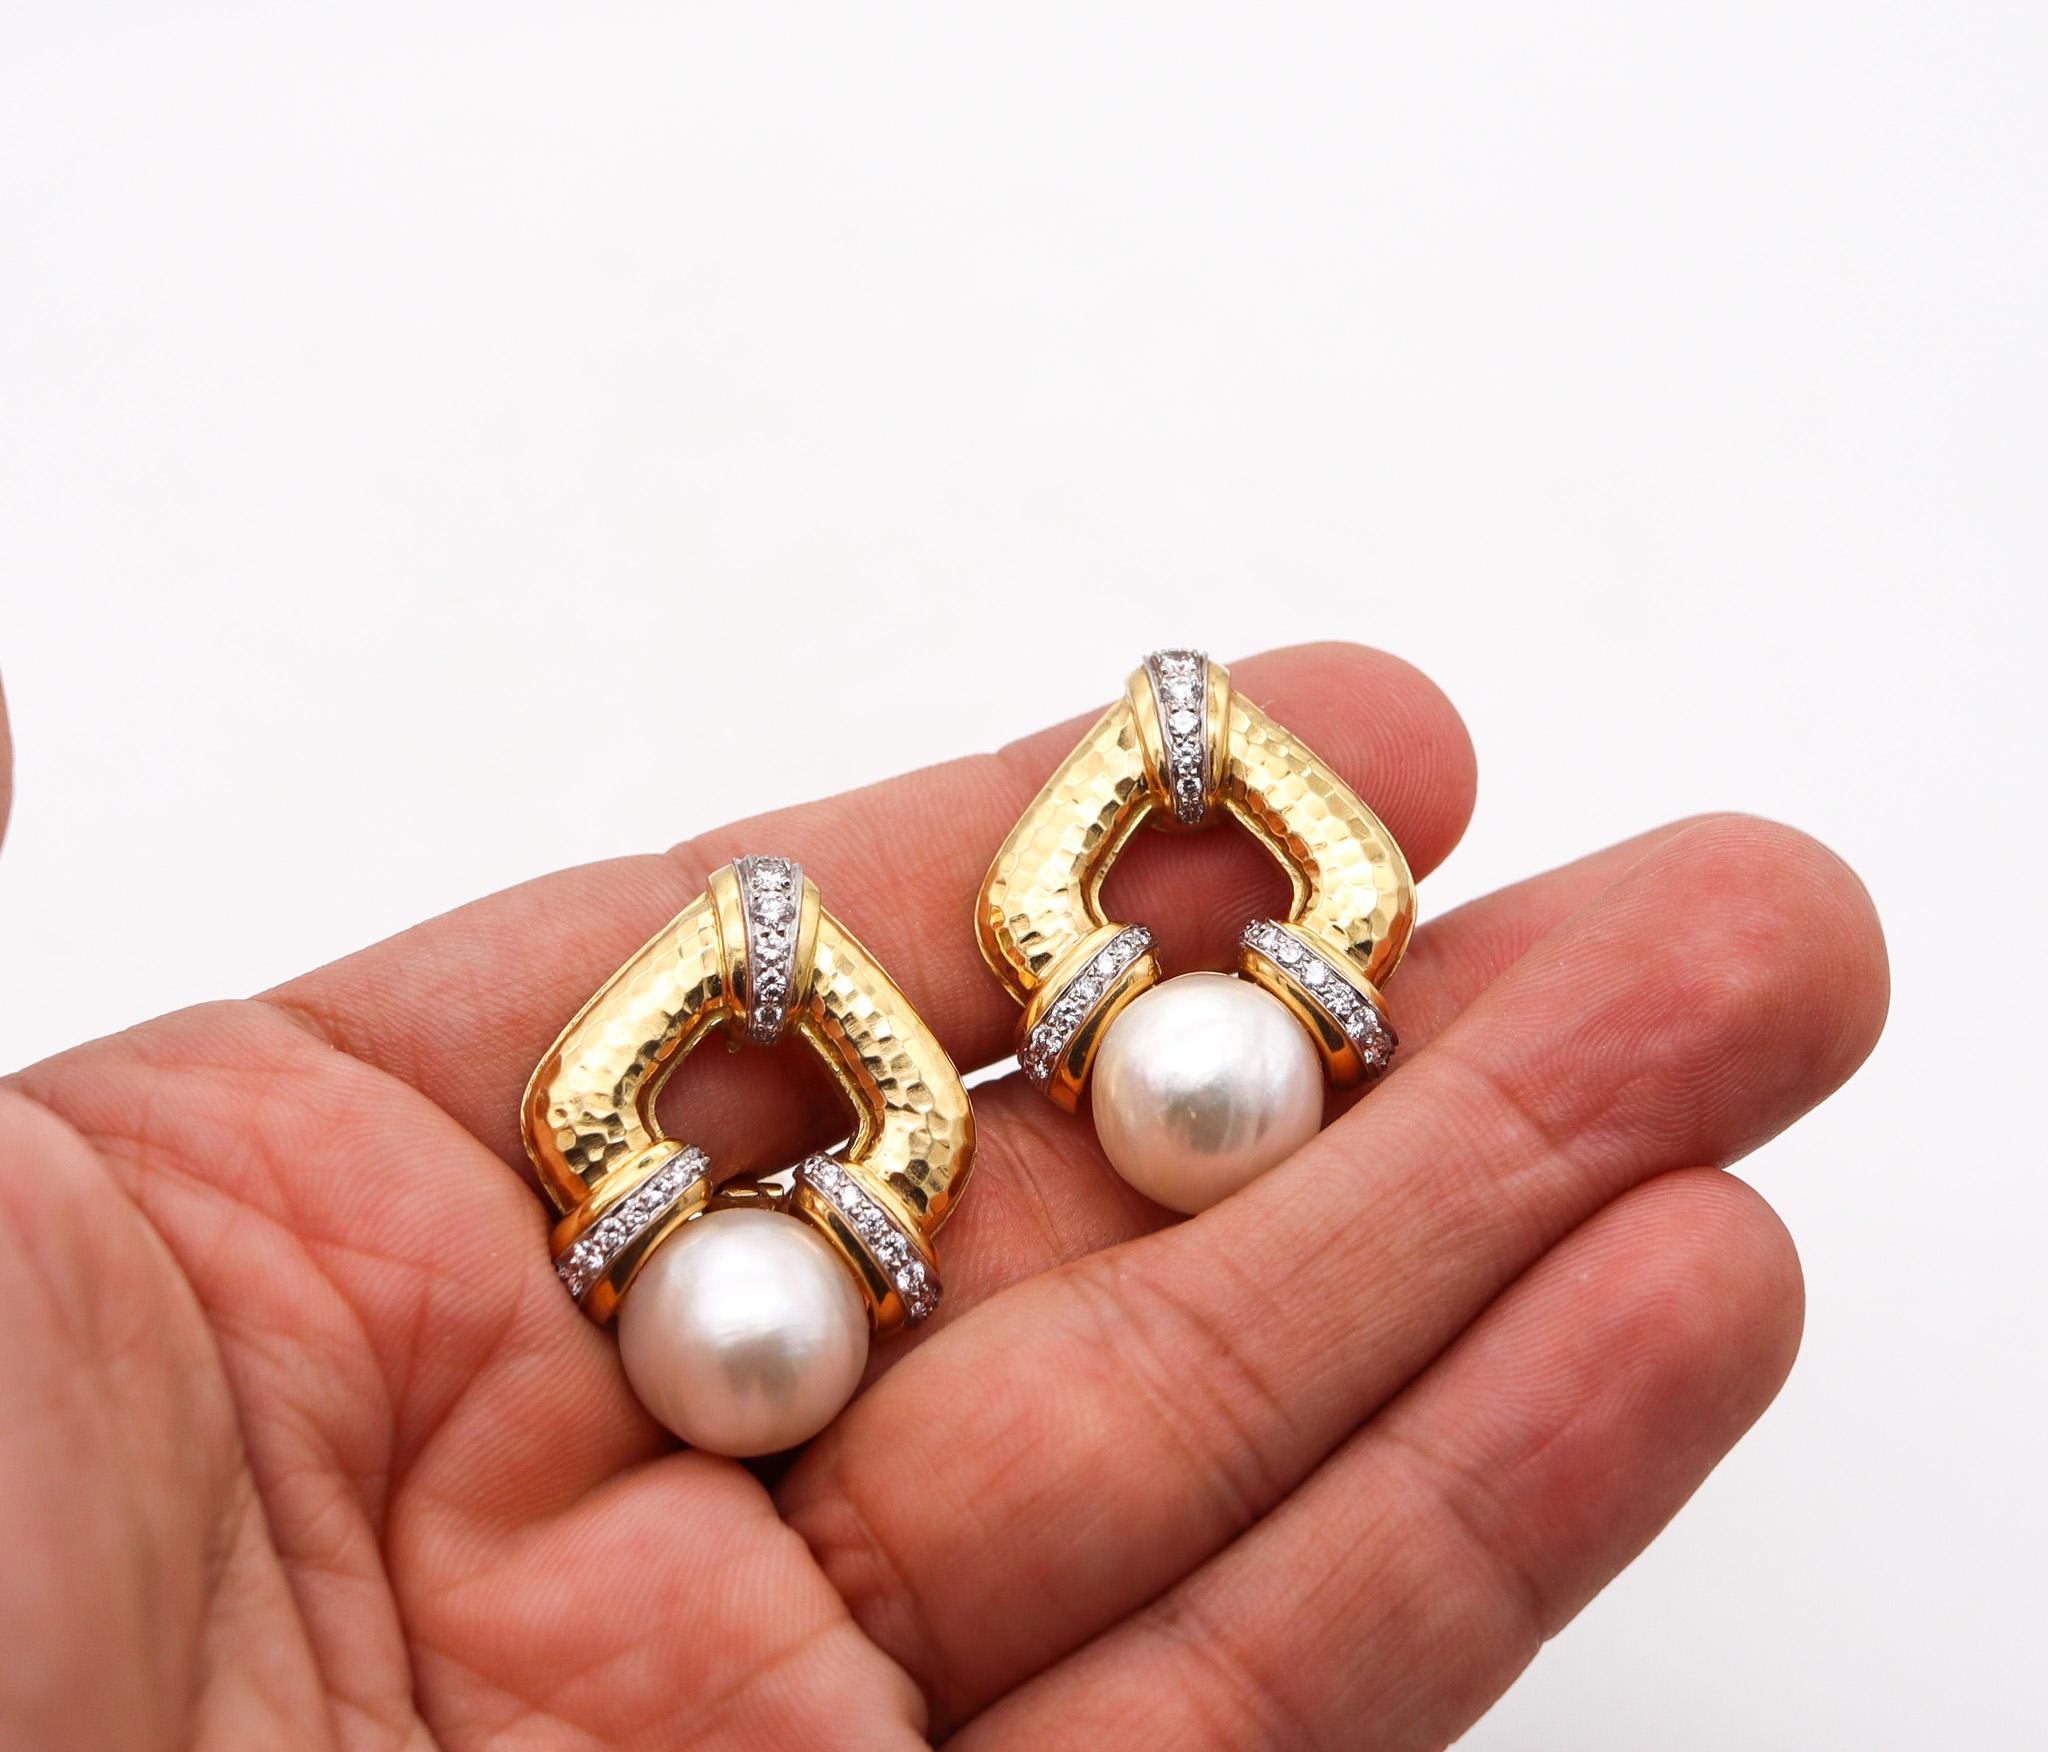 Andrew Clunn Pearls Earrings In 18Kt Yellow Gold With 1.20 Ctw In Diamonds In Excellent Condition For Sale In Miami, FL